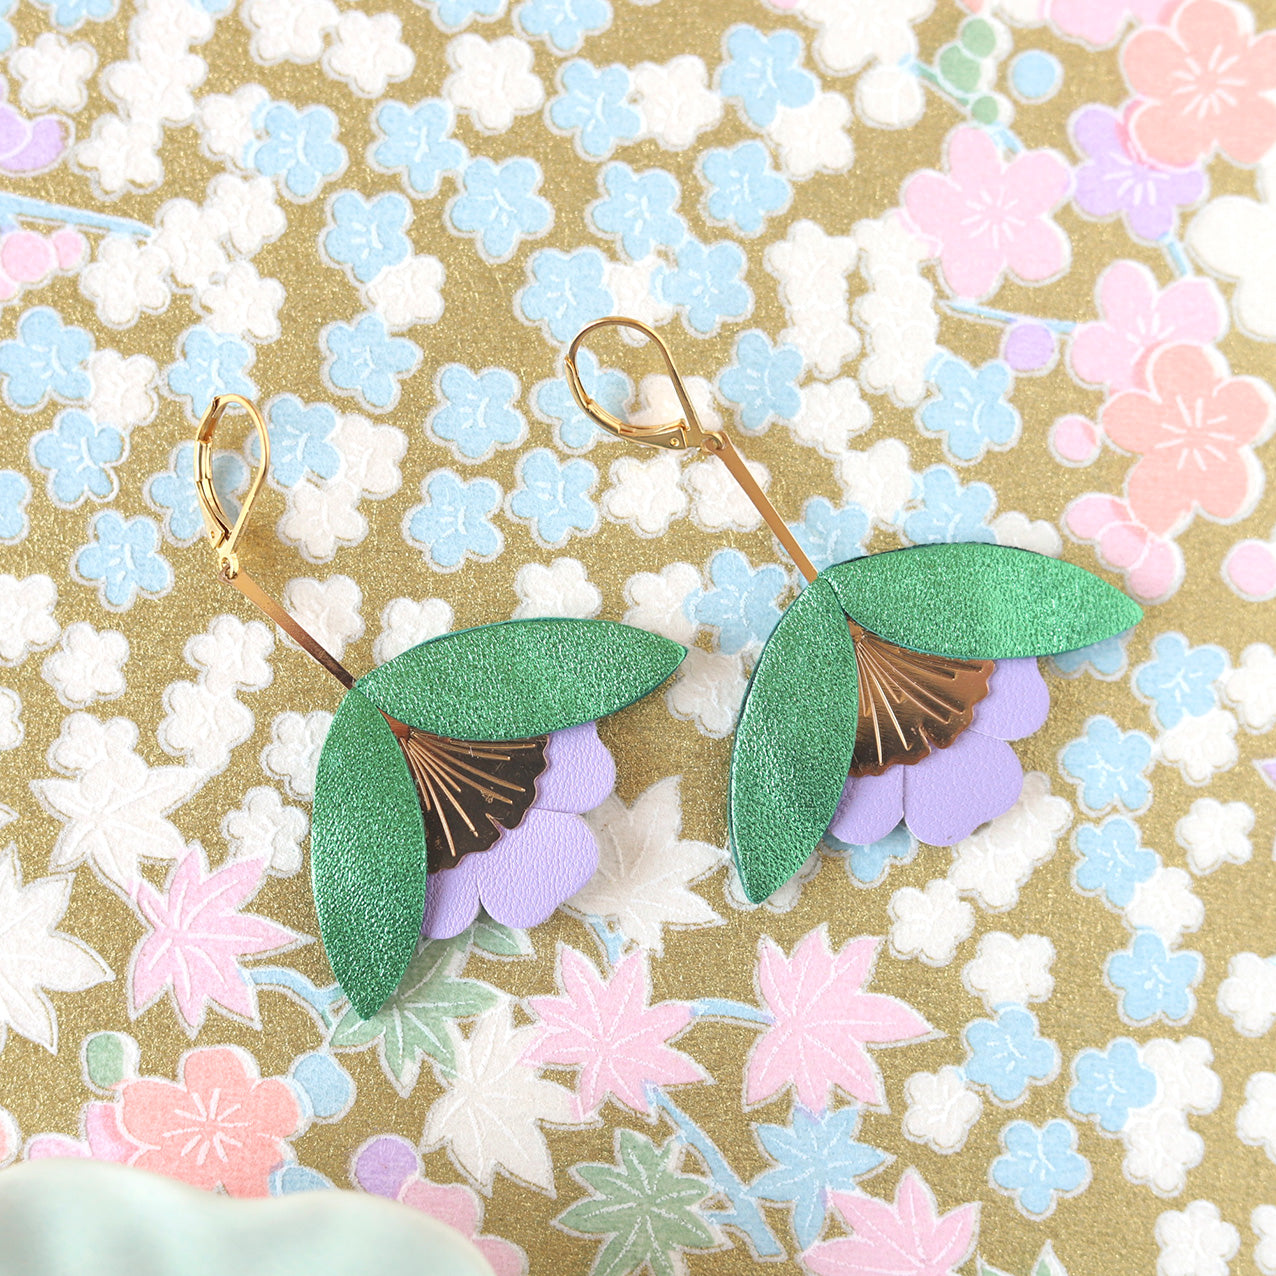 Ginkgo Flower earrings in metallic green and mauve leather